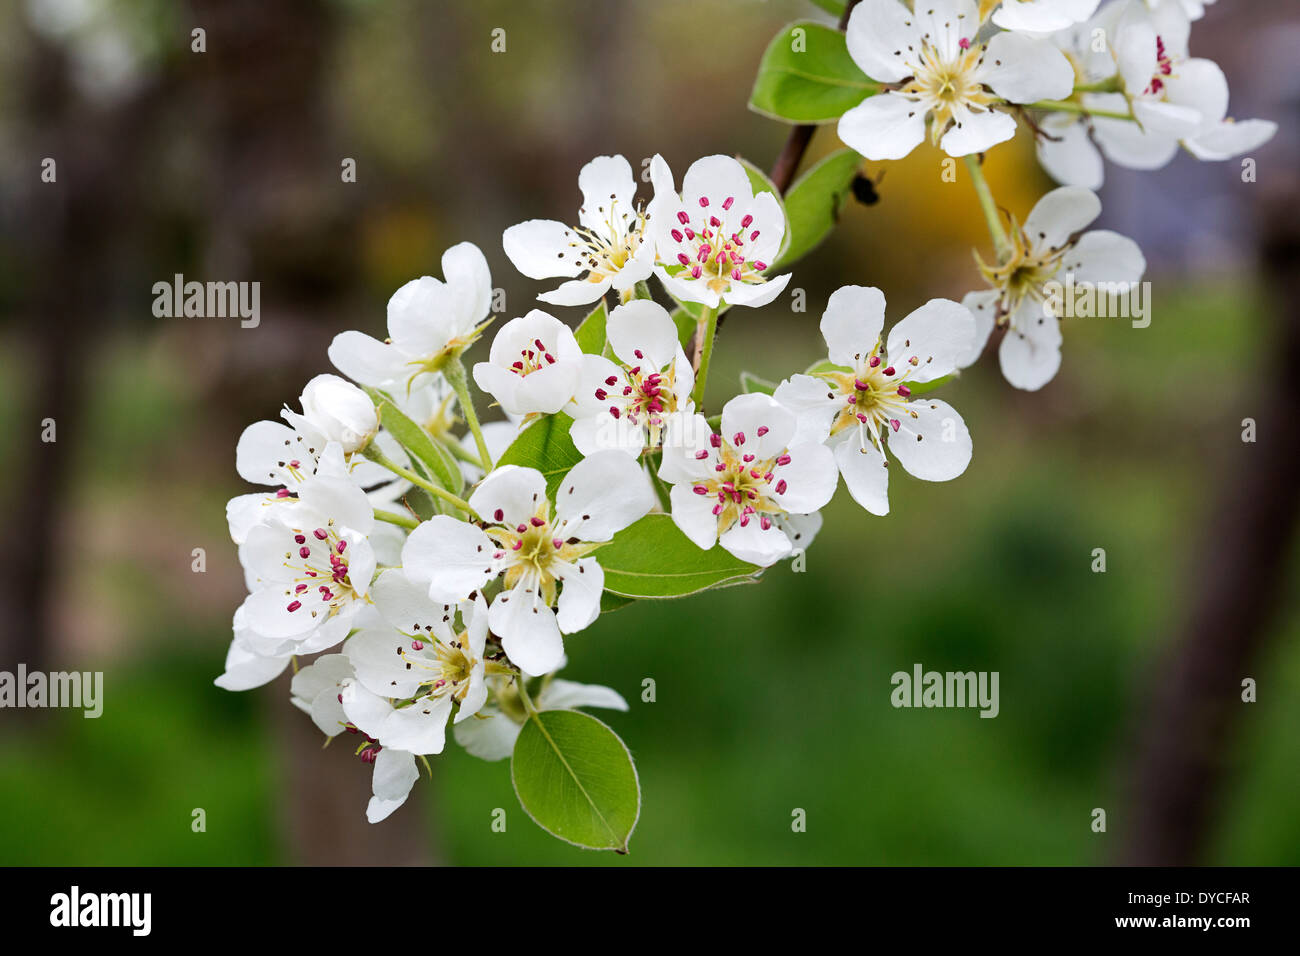 Blossoming Pear (Pyrus sp.) Stock Photo